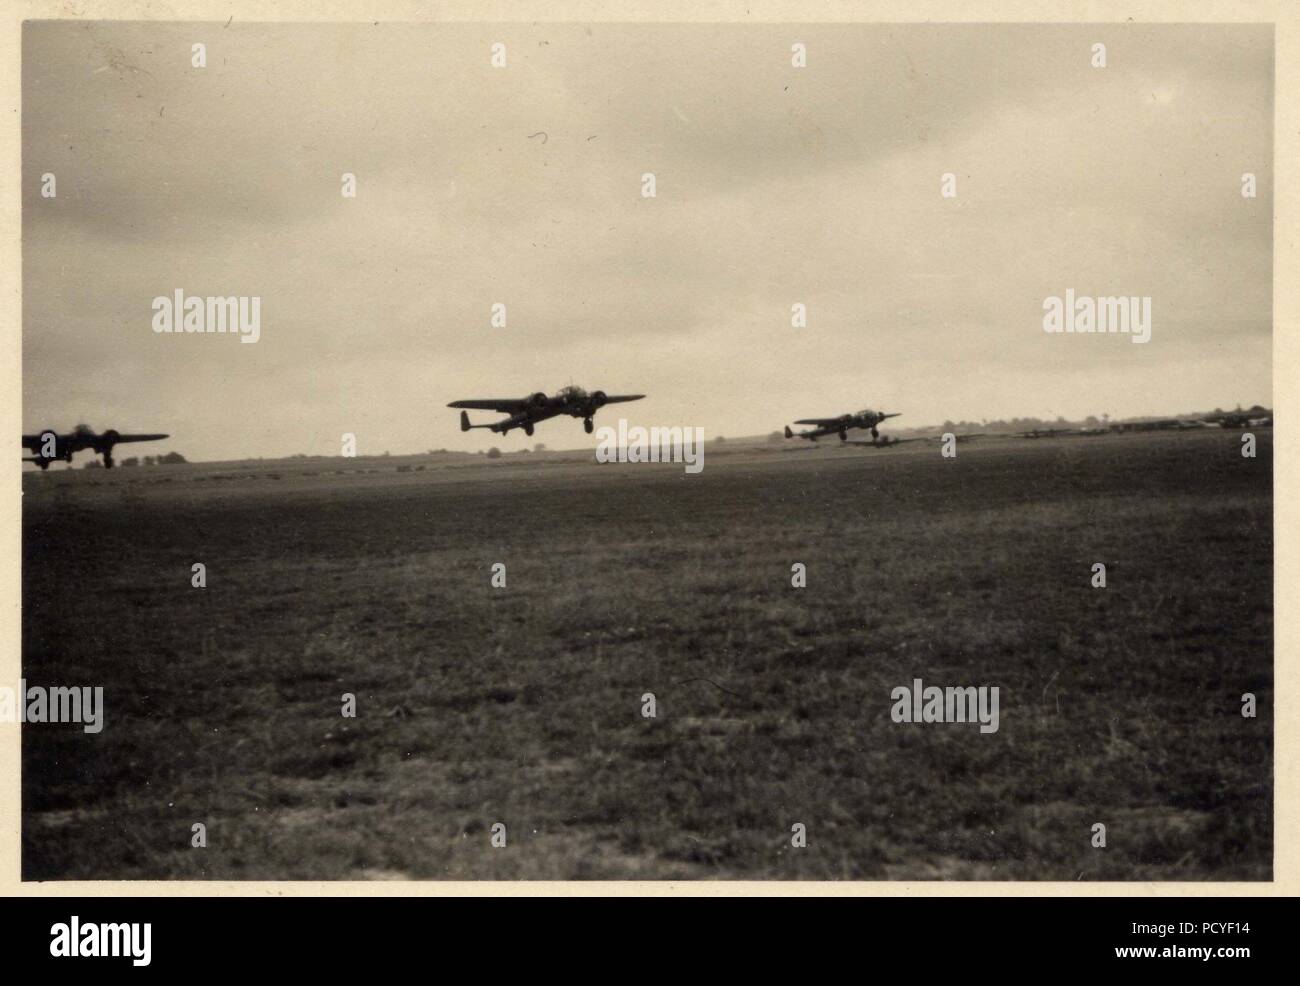 Image from the photo album of Oberfeldwebel Gotthilf Benseler of 9. Staffel, Kampfgeschwader 3: A 'Kette' of Dornier Do17Z-2s of 9. Staffel, Kampfgeschwader 3 takes off to attack targets in Poland, September 1939. Just discernible in this image are the early 'Ace of Hearts' Staffel badges carried on the sides of the aircraft. This badge was inherited from the unit's predecessor 9./KG 153. In later versions, the Staffel badge showed only the red heart and the large, white playing card was omitted. Stock Photo